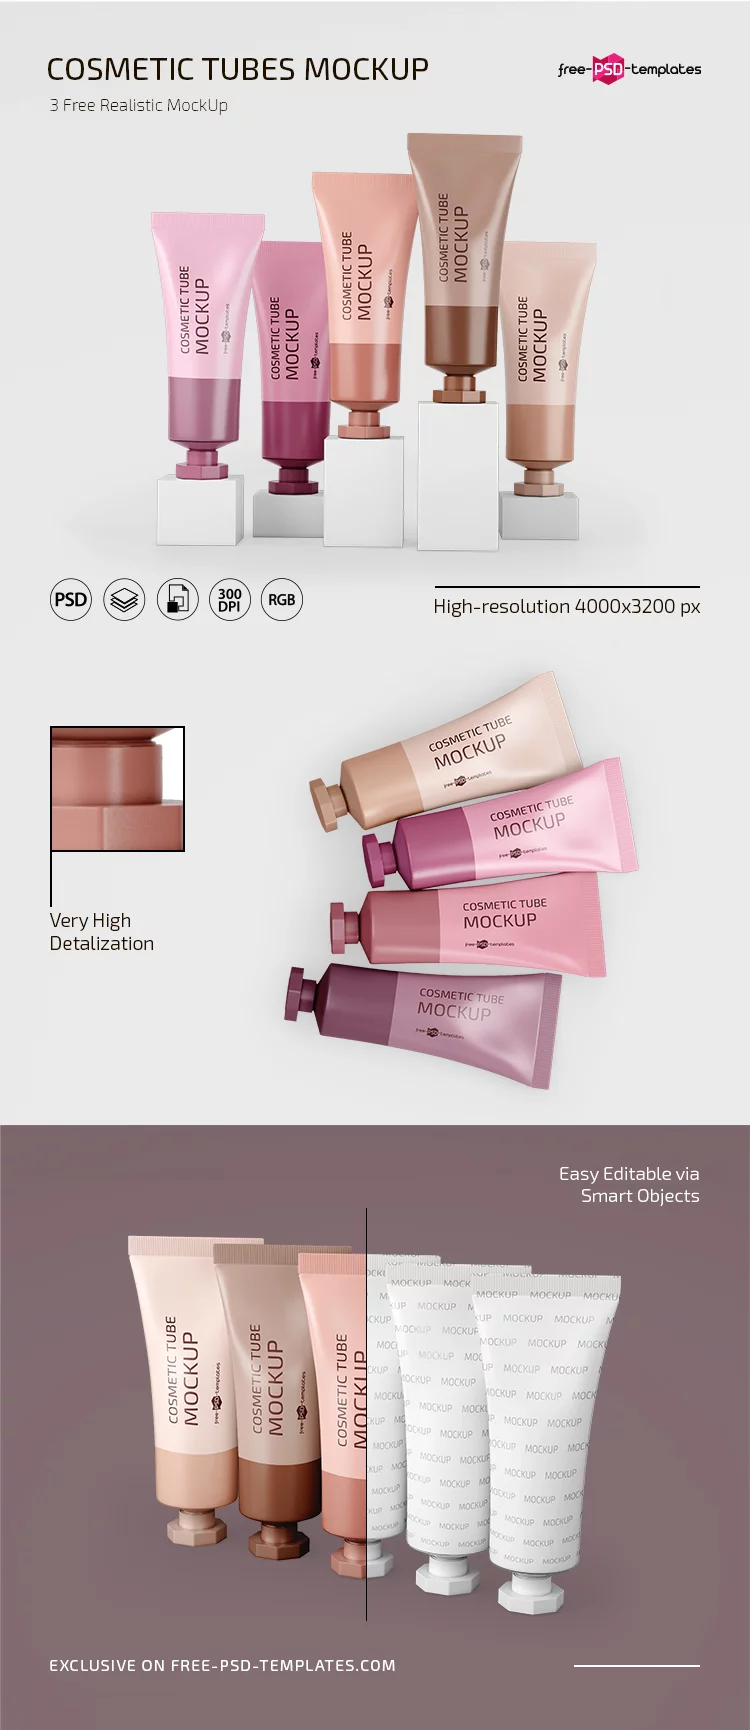 Free Cosmetic Tubes Mockup in PSD